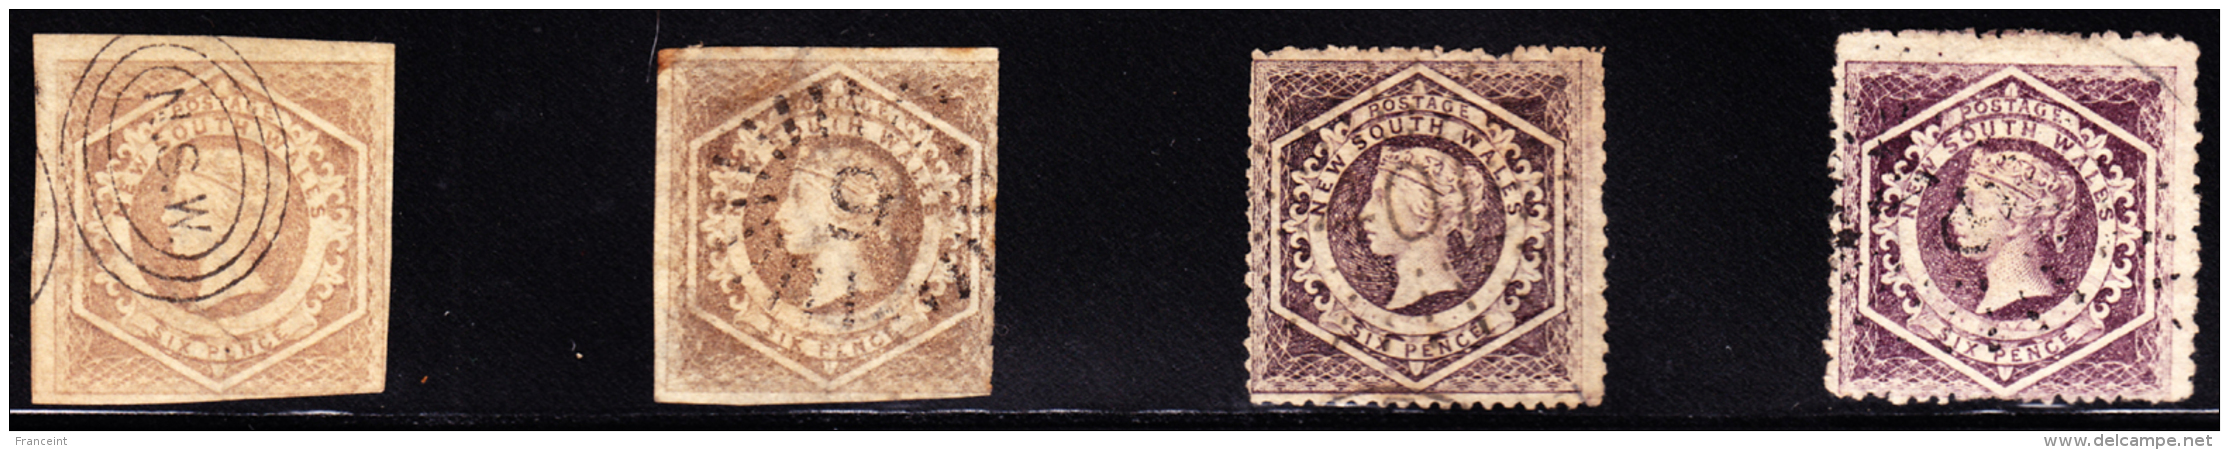 NSW 6p Victoria In Hex Frame, 4 Used Examples. - Usados